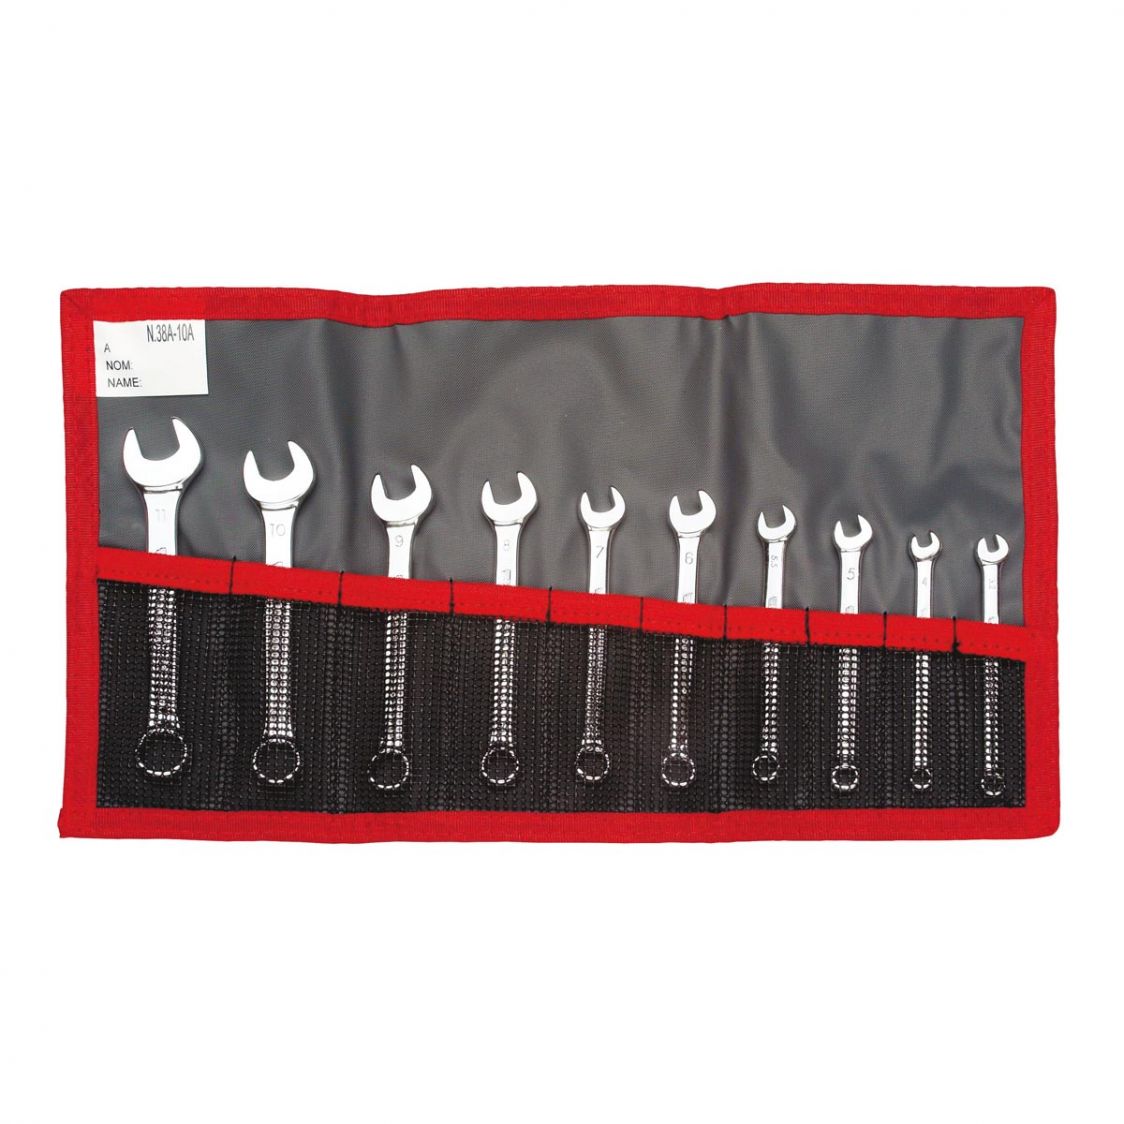 FACOM 39.JE10T - 10pc Metric Stubby Combination Spanner Set + Roll